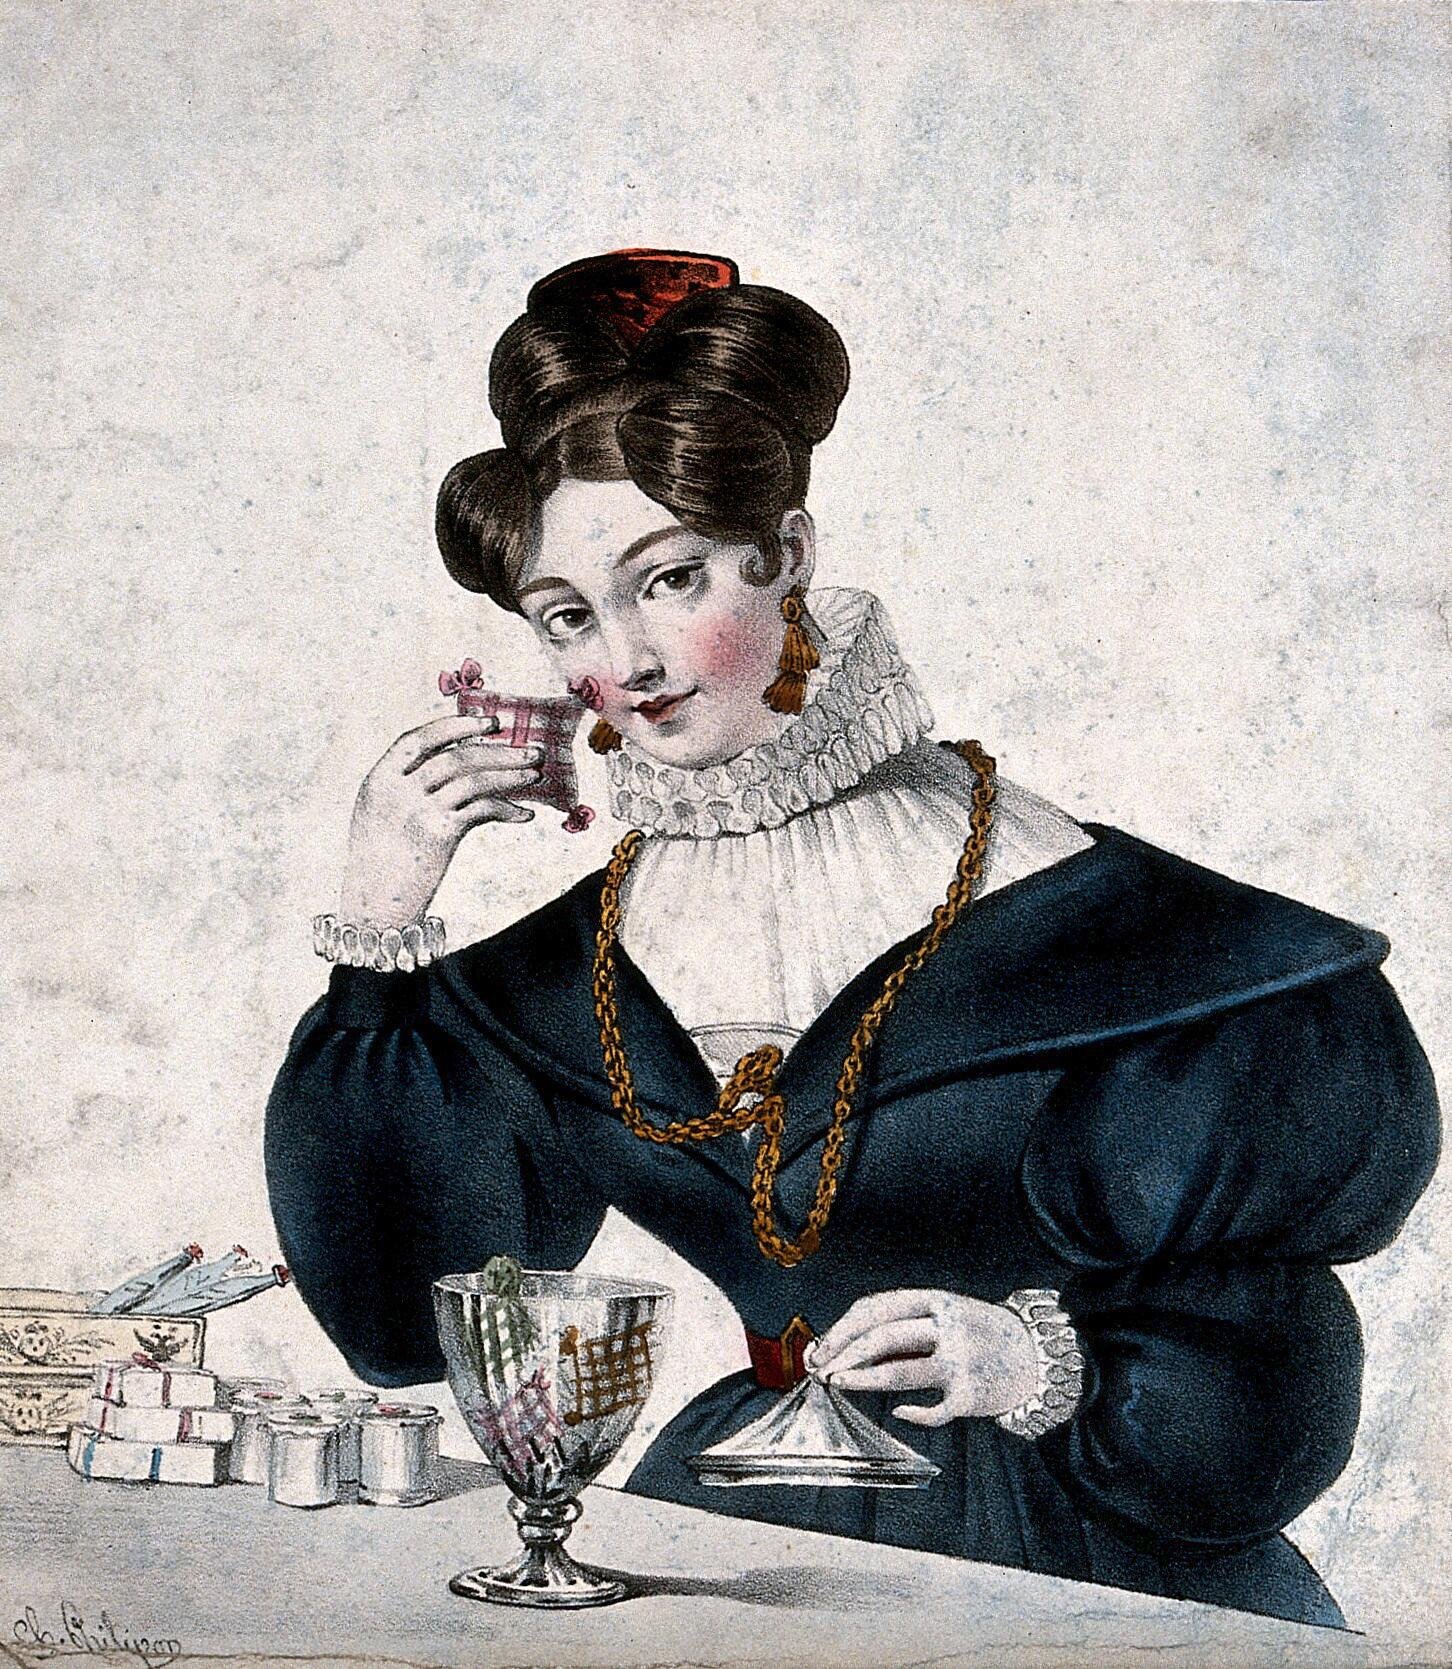 A woman perfume-seller holds a small lavender bag up to her face. Coloured lithograph by Joséphine-Clémence Formentin after Charles Philipon, 1828..jpg